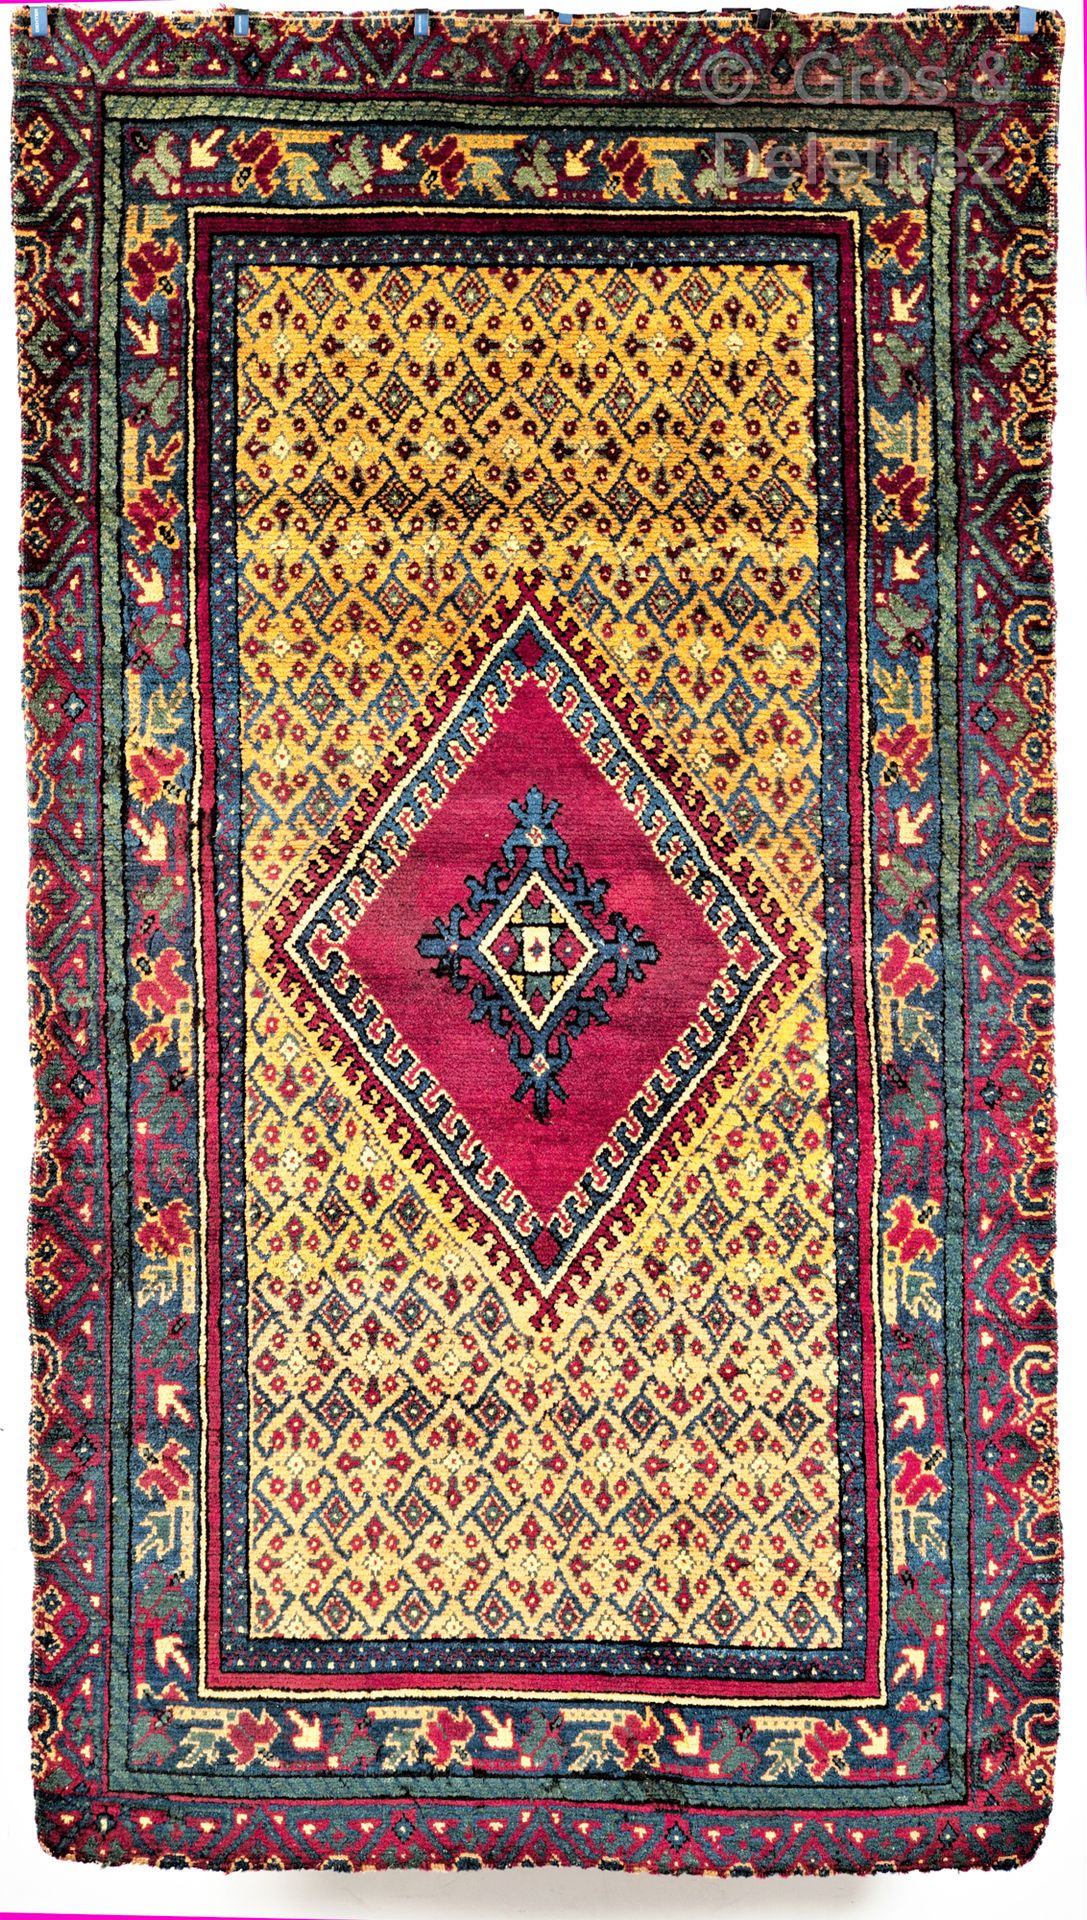 Null "A rare antique workshop carpet from Morocco or Tunisia 

A rare antique wo&hellip;